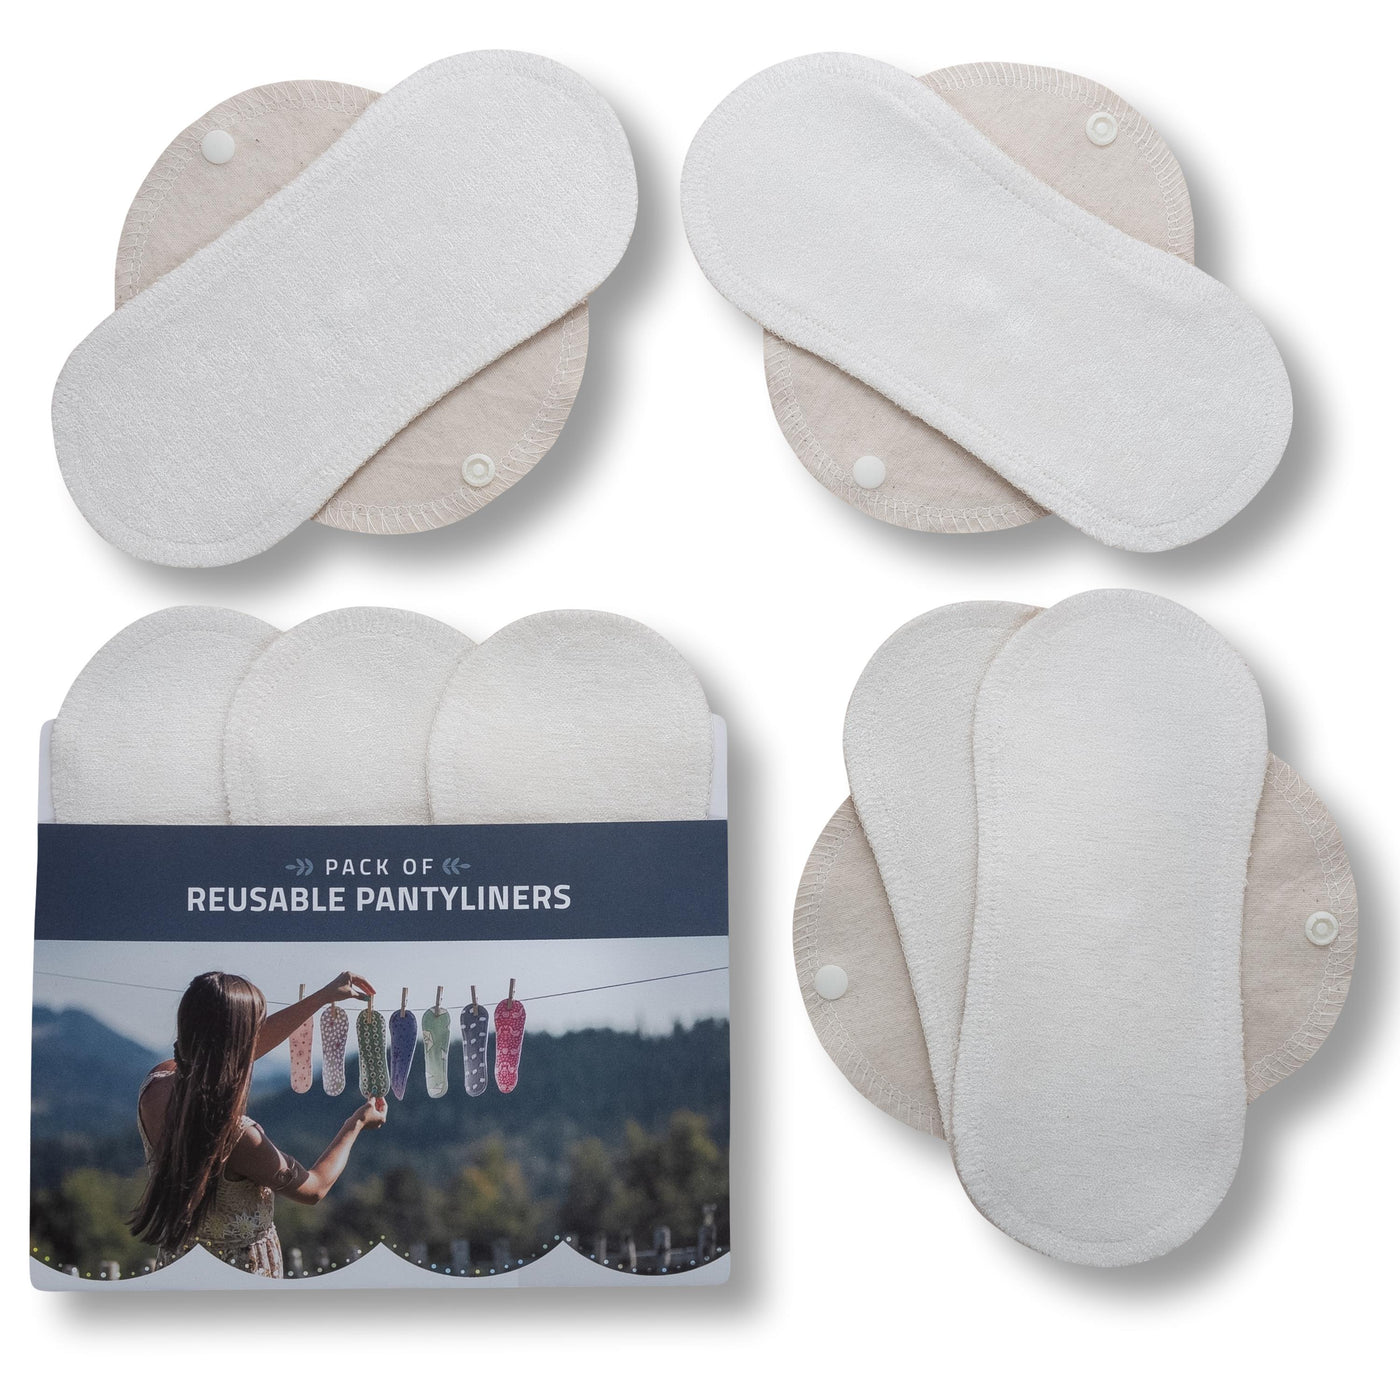 Certified Bamboo Reusable Panty Liners with Wings 7-Pack (normal discharge)  - Natural (white wings)